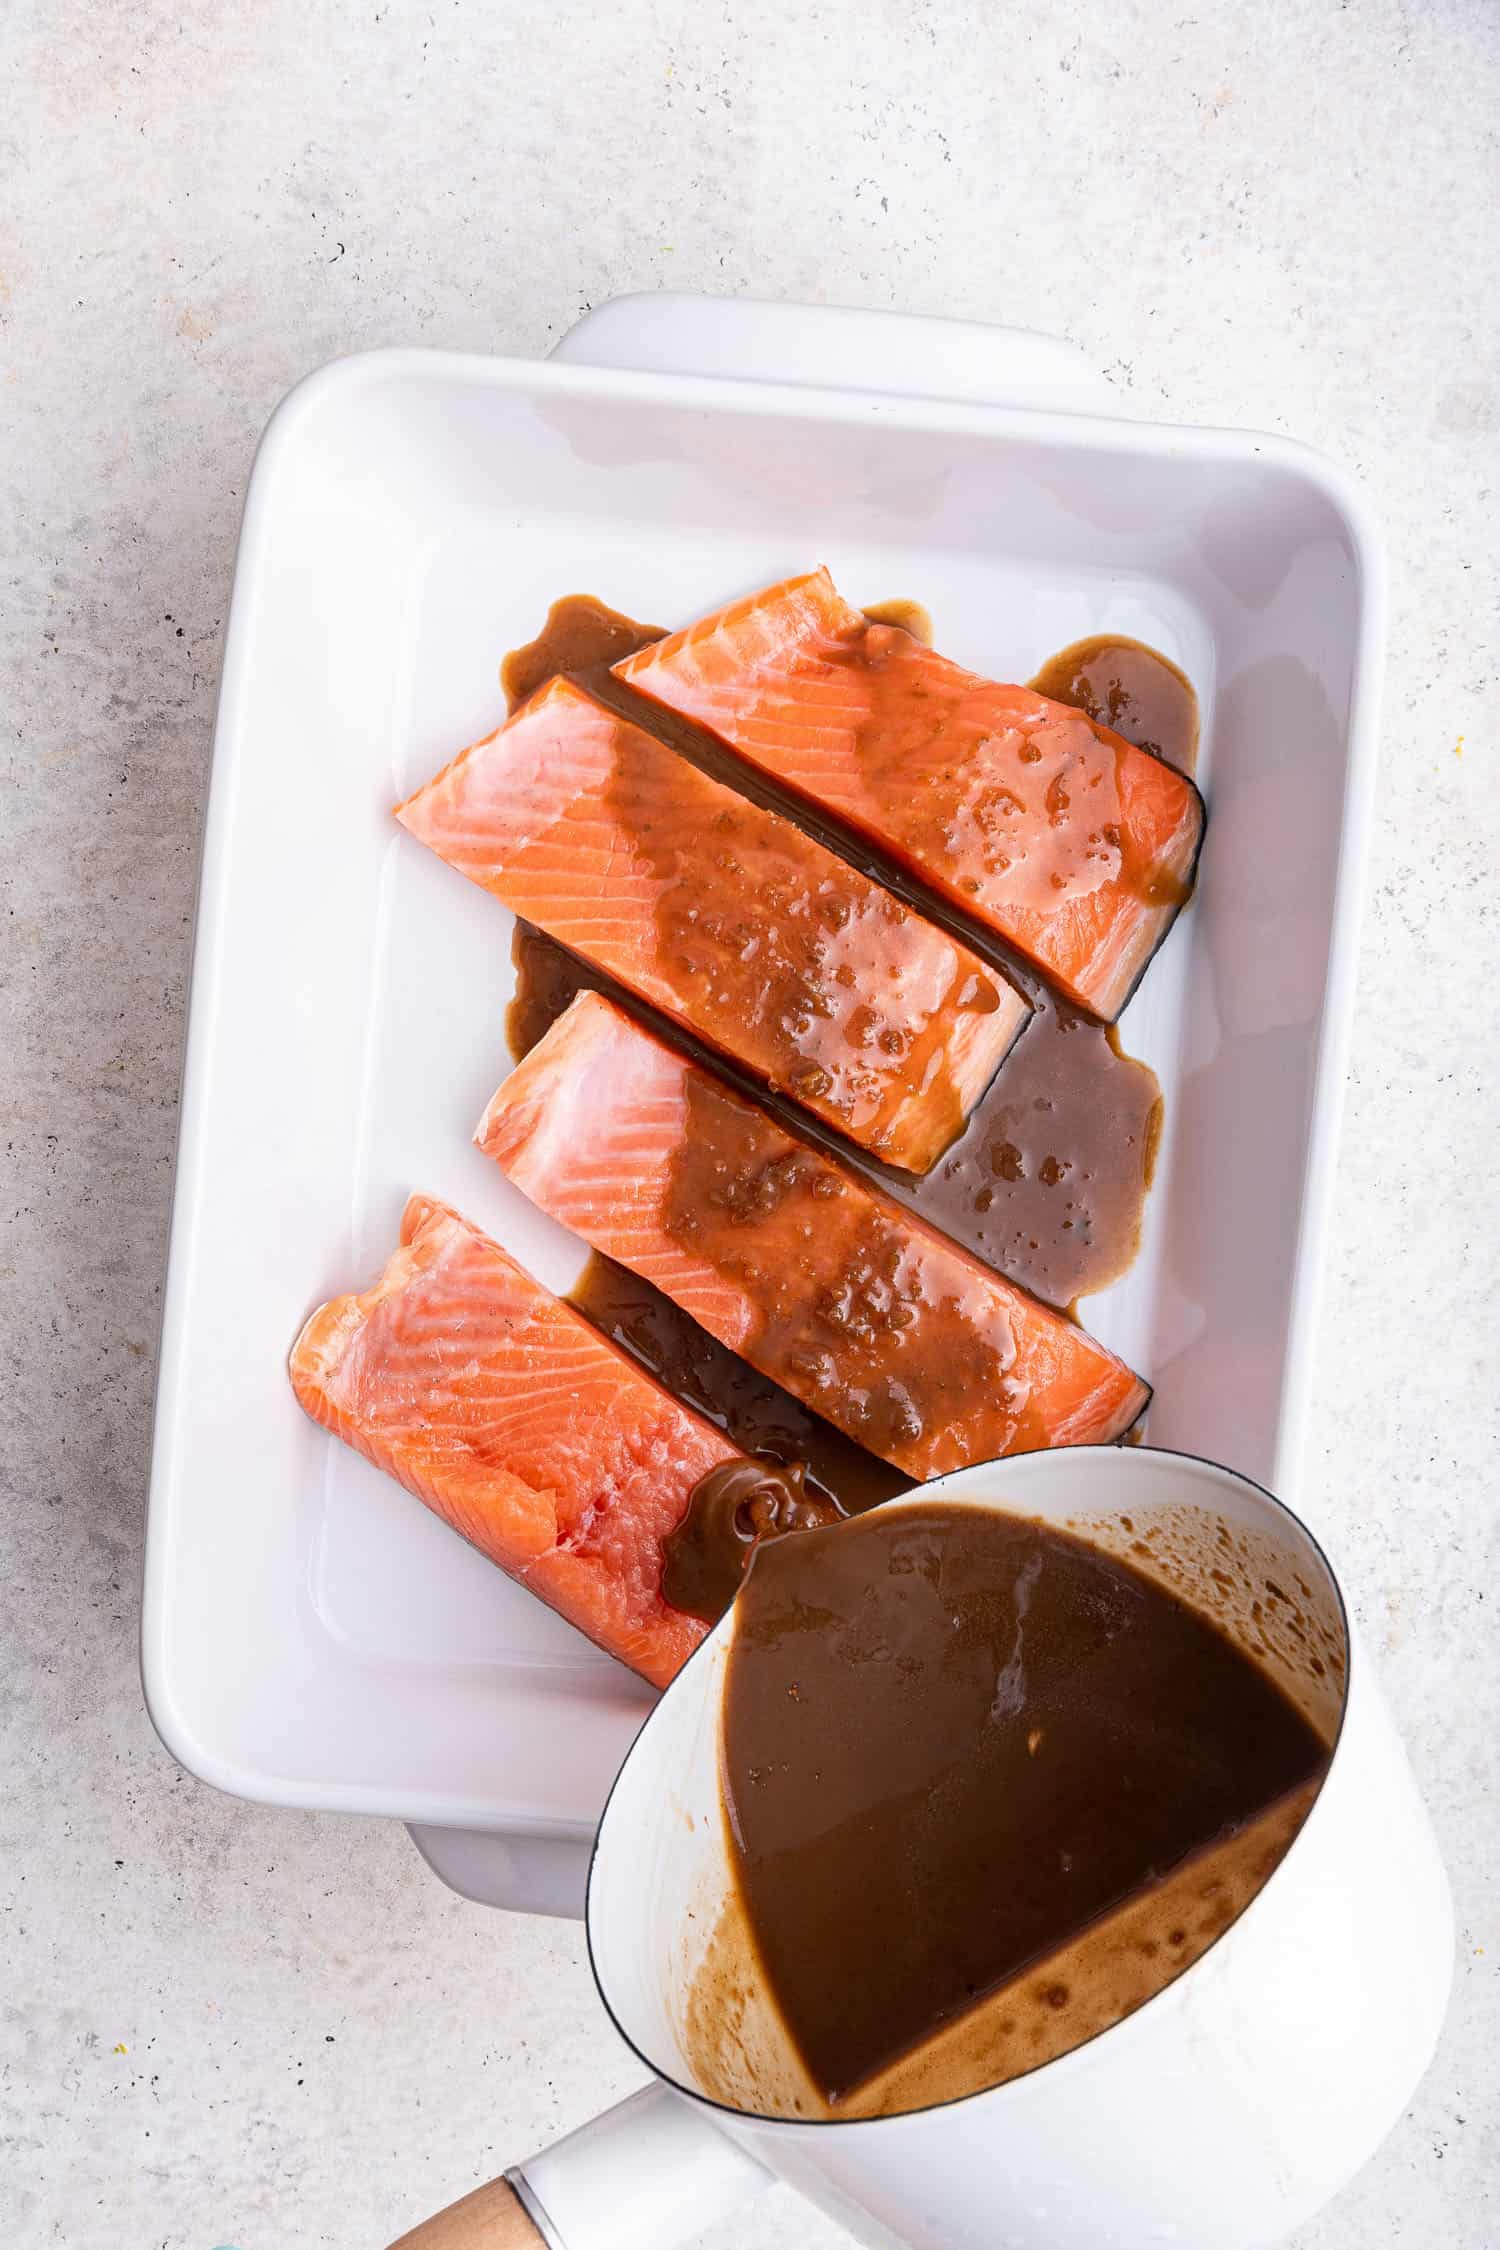 pouring sauce on the salmon